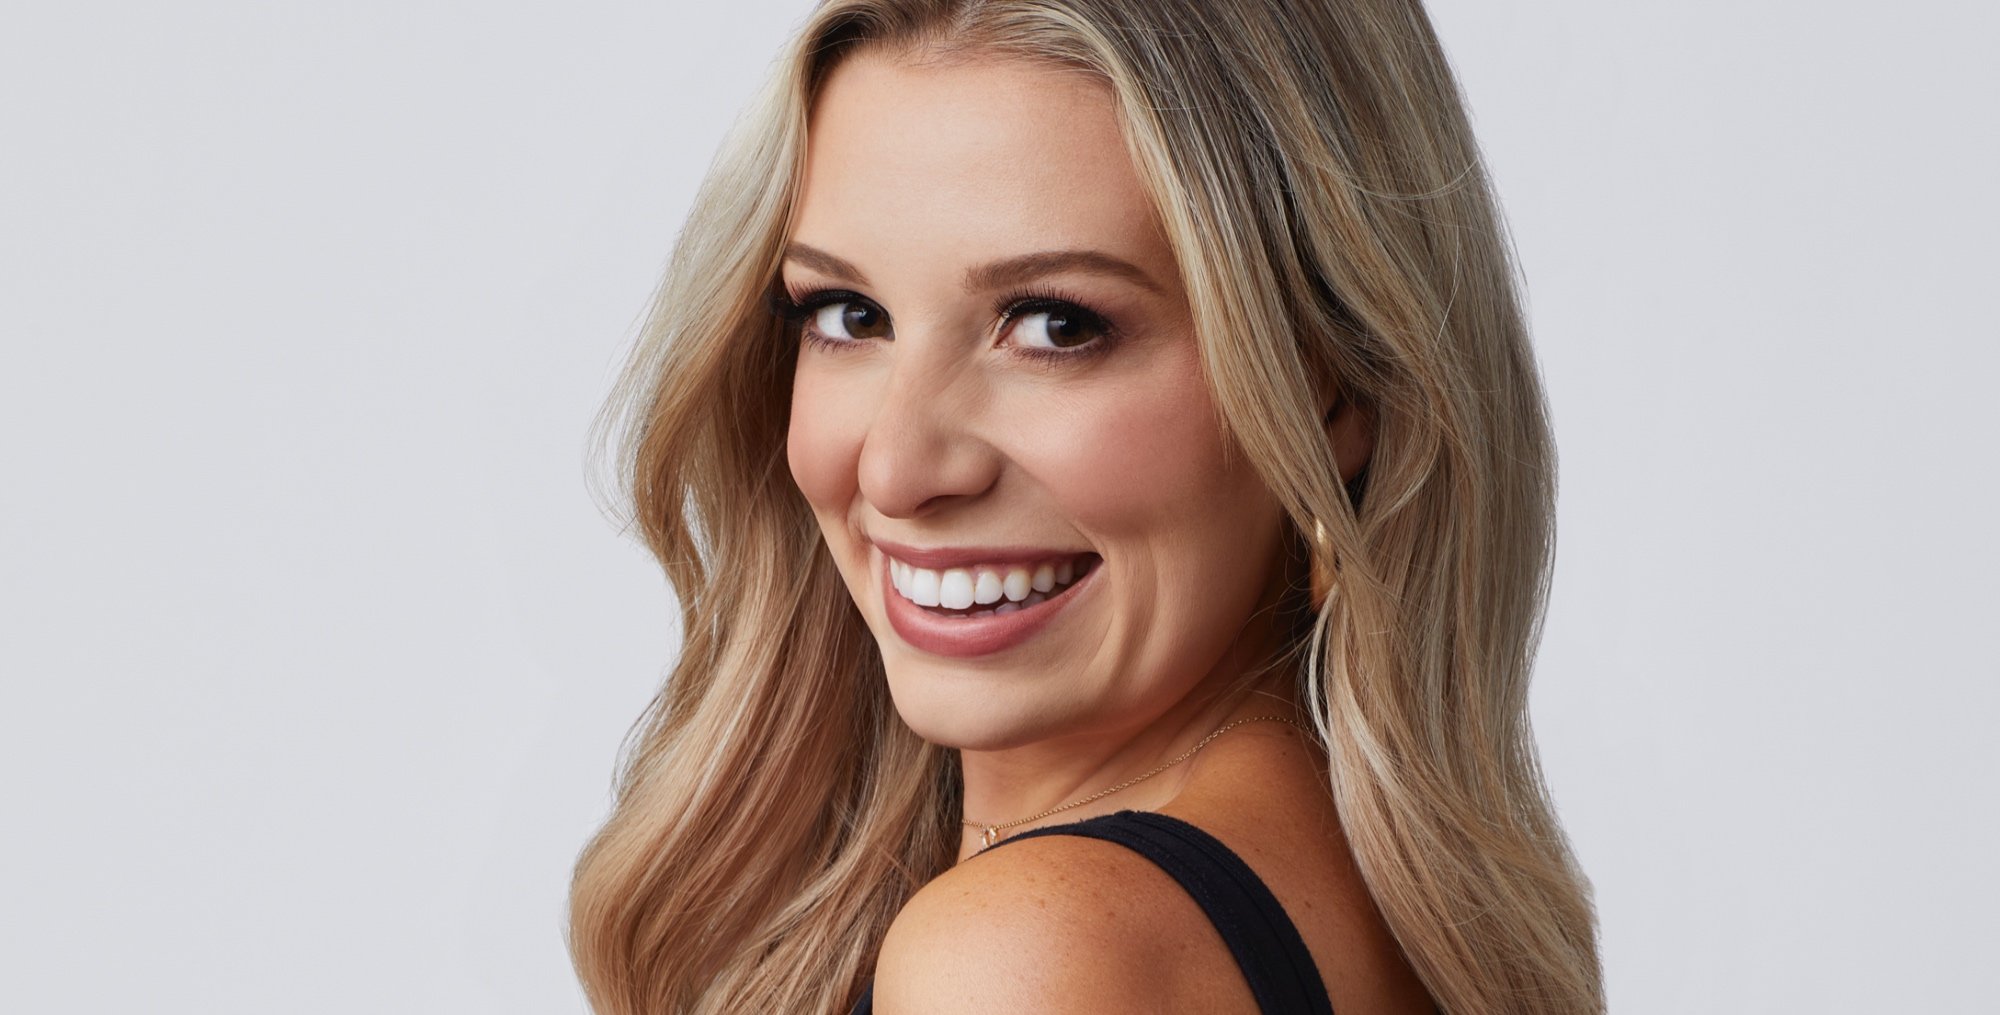 Hunter Haag for 'The Bachelor' 2022 Season 26 wearing black top and smiling.